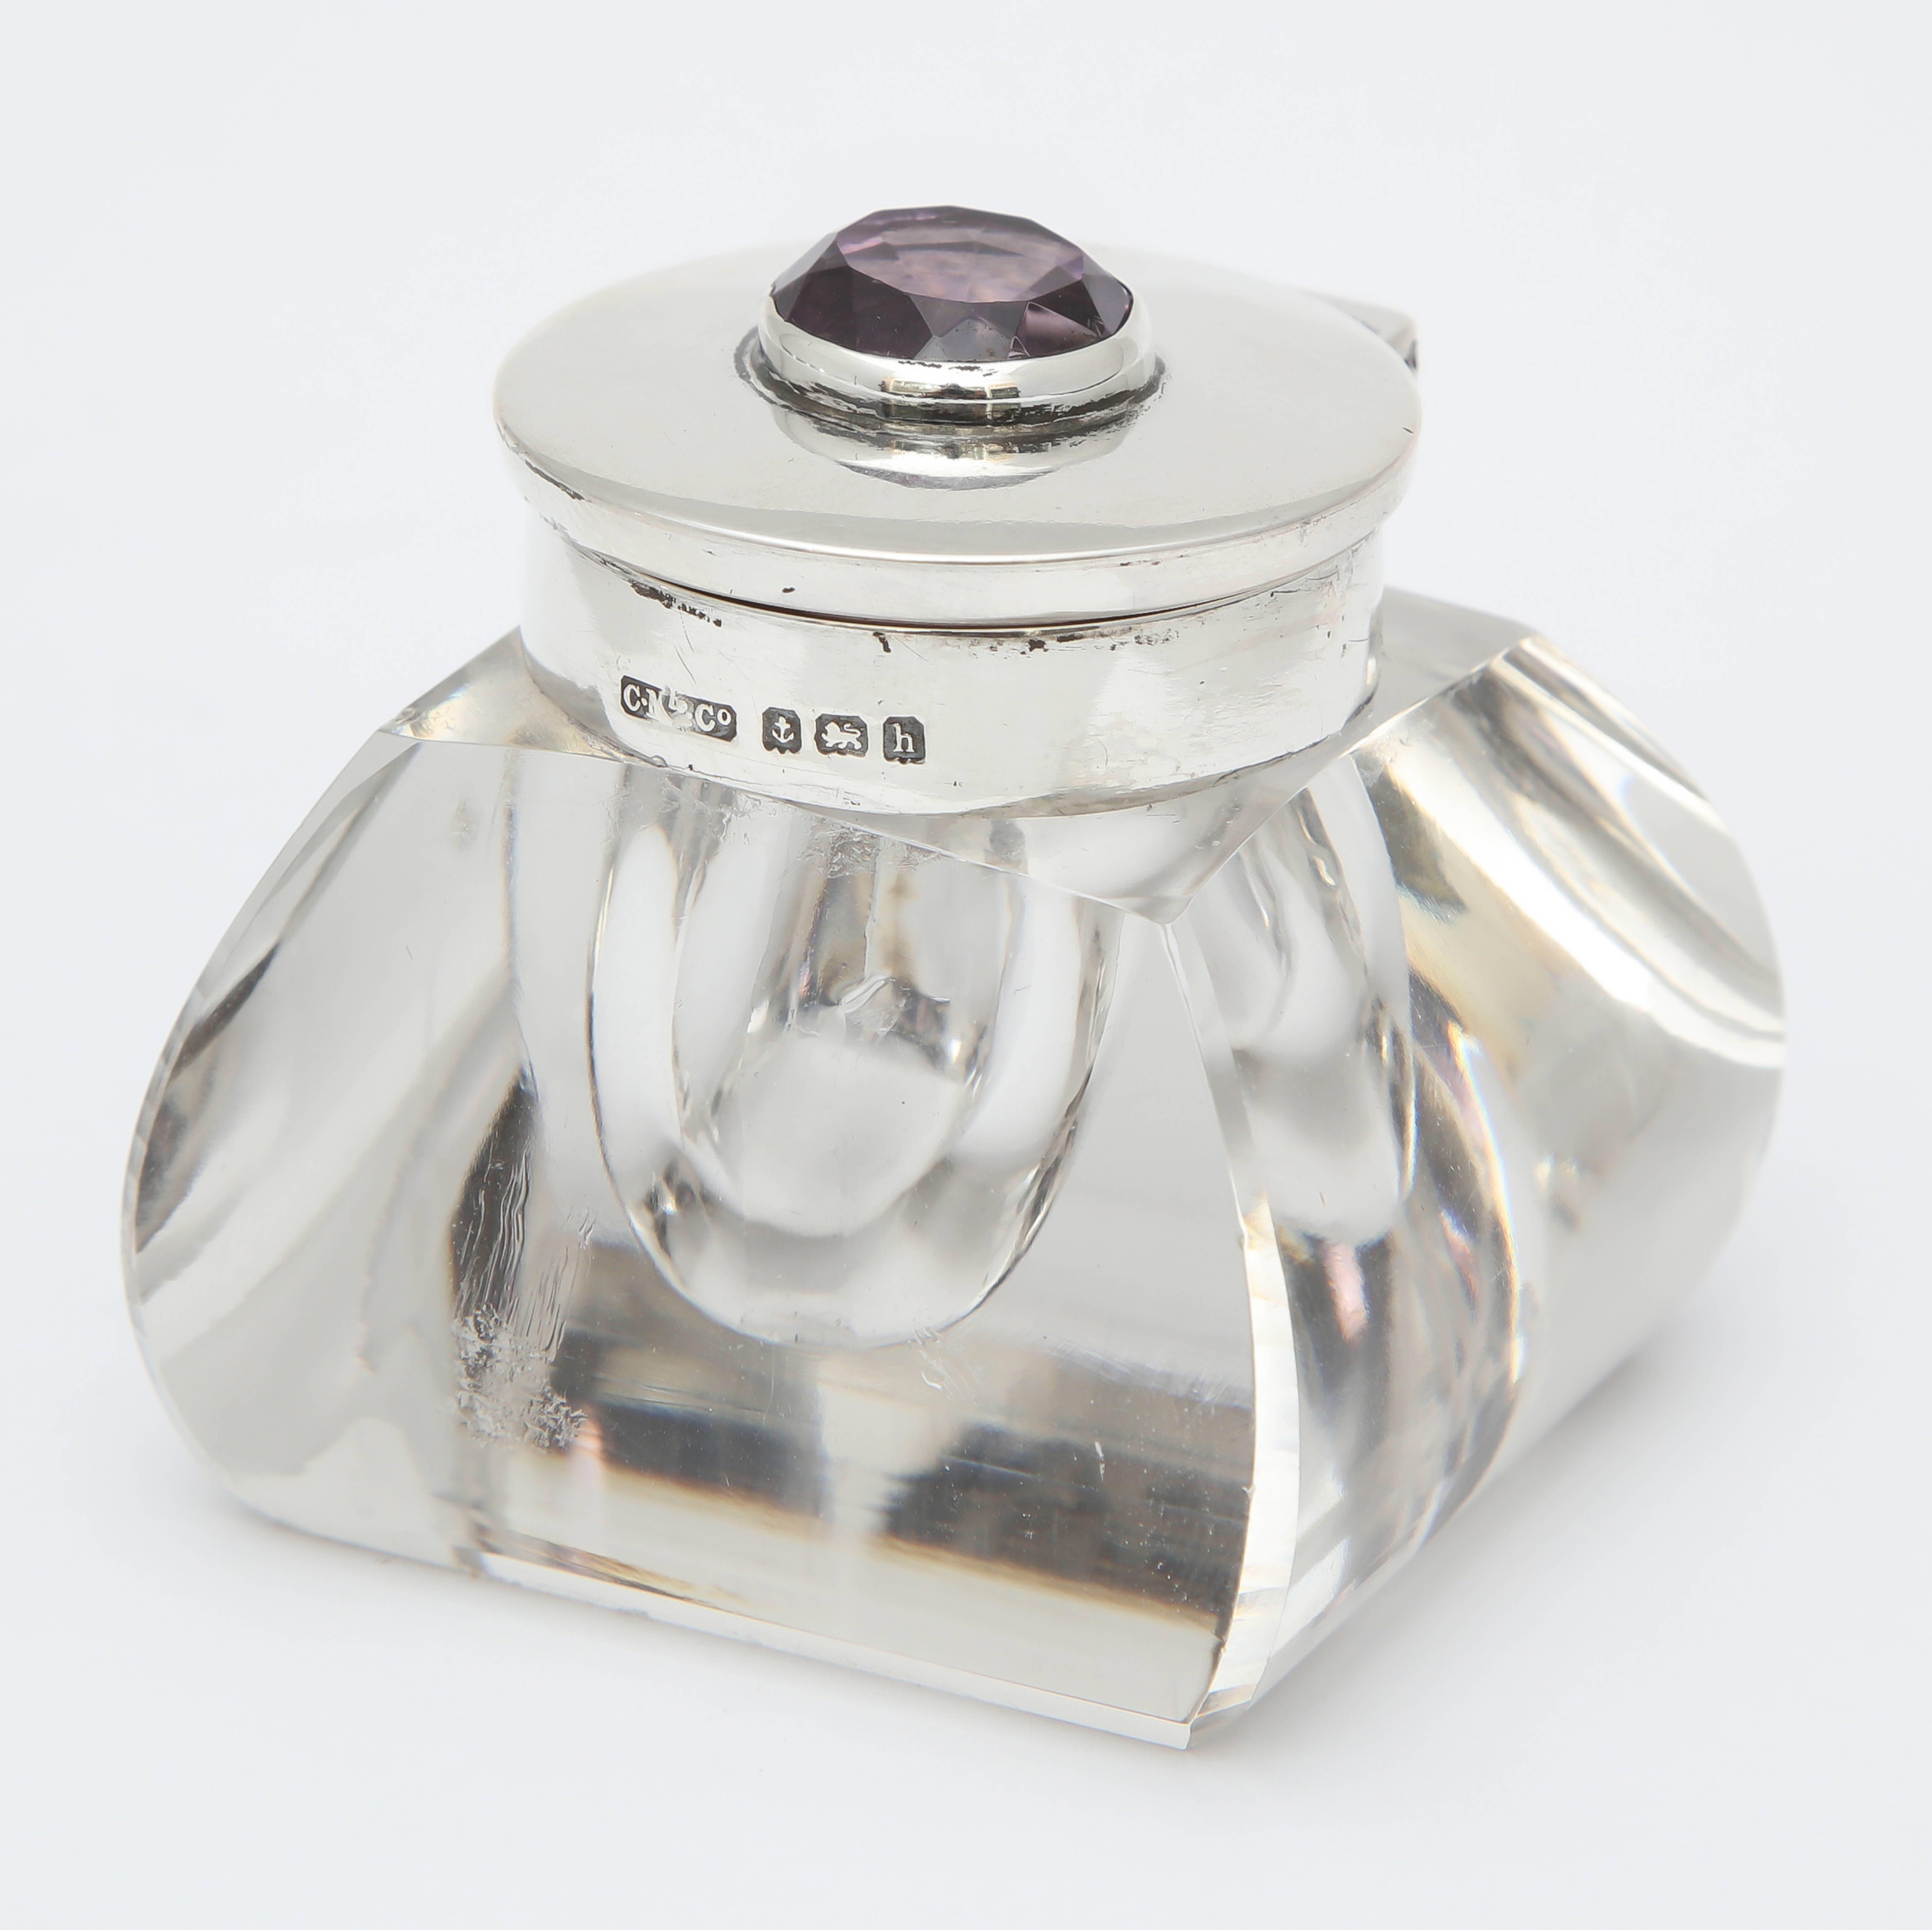 Beautiful, Edwardian, sterling silver-mounted crystal inkwell with hinged lid, Birmingham, England, 1907, Charles Newbury & Co. - makers. Hinged lid is decorated with an inset real amethyst. Measures: @2 inches wide x @2 inches deep x @2 1/4 inches